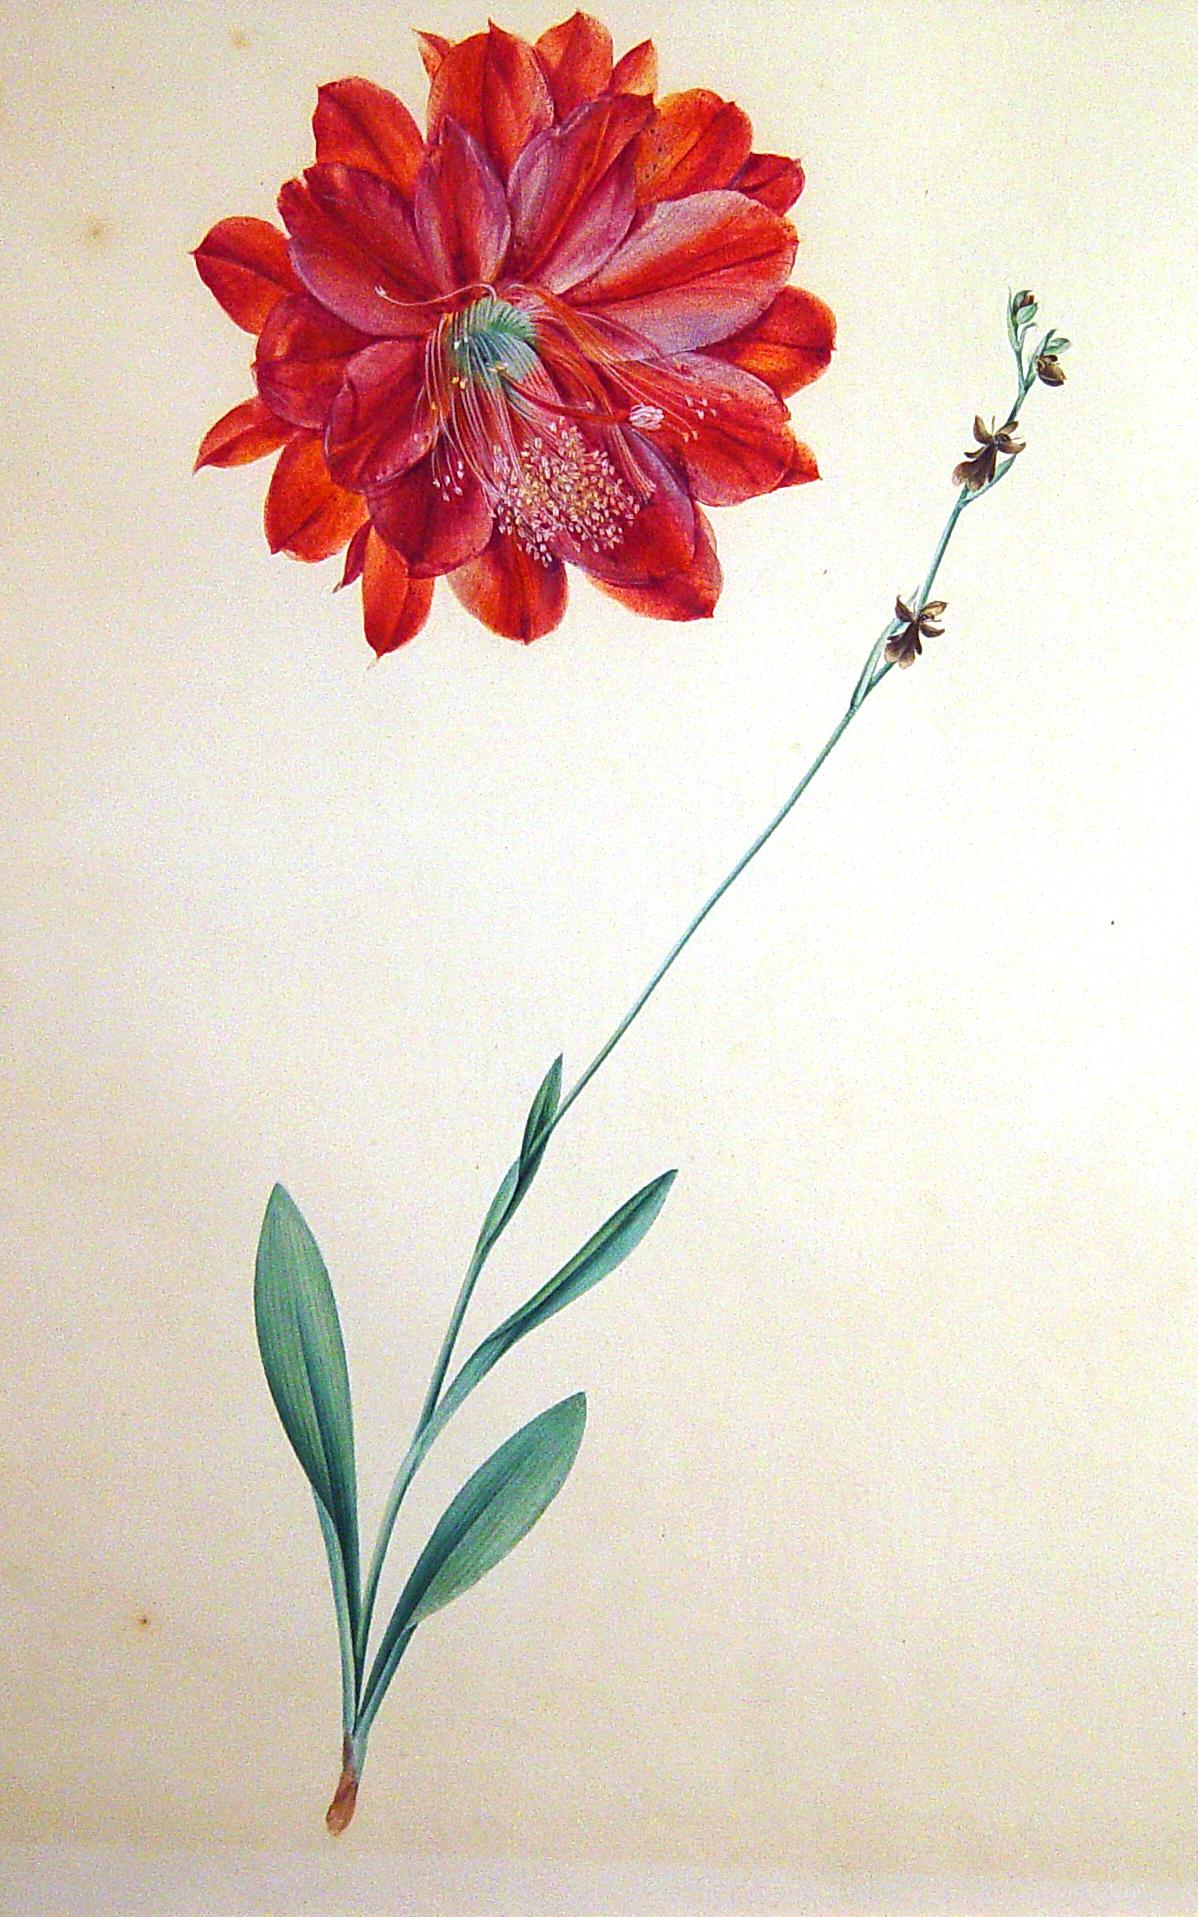 Georgian 18th Century European Botanical Watercolor and Gouache Painting of Flowers